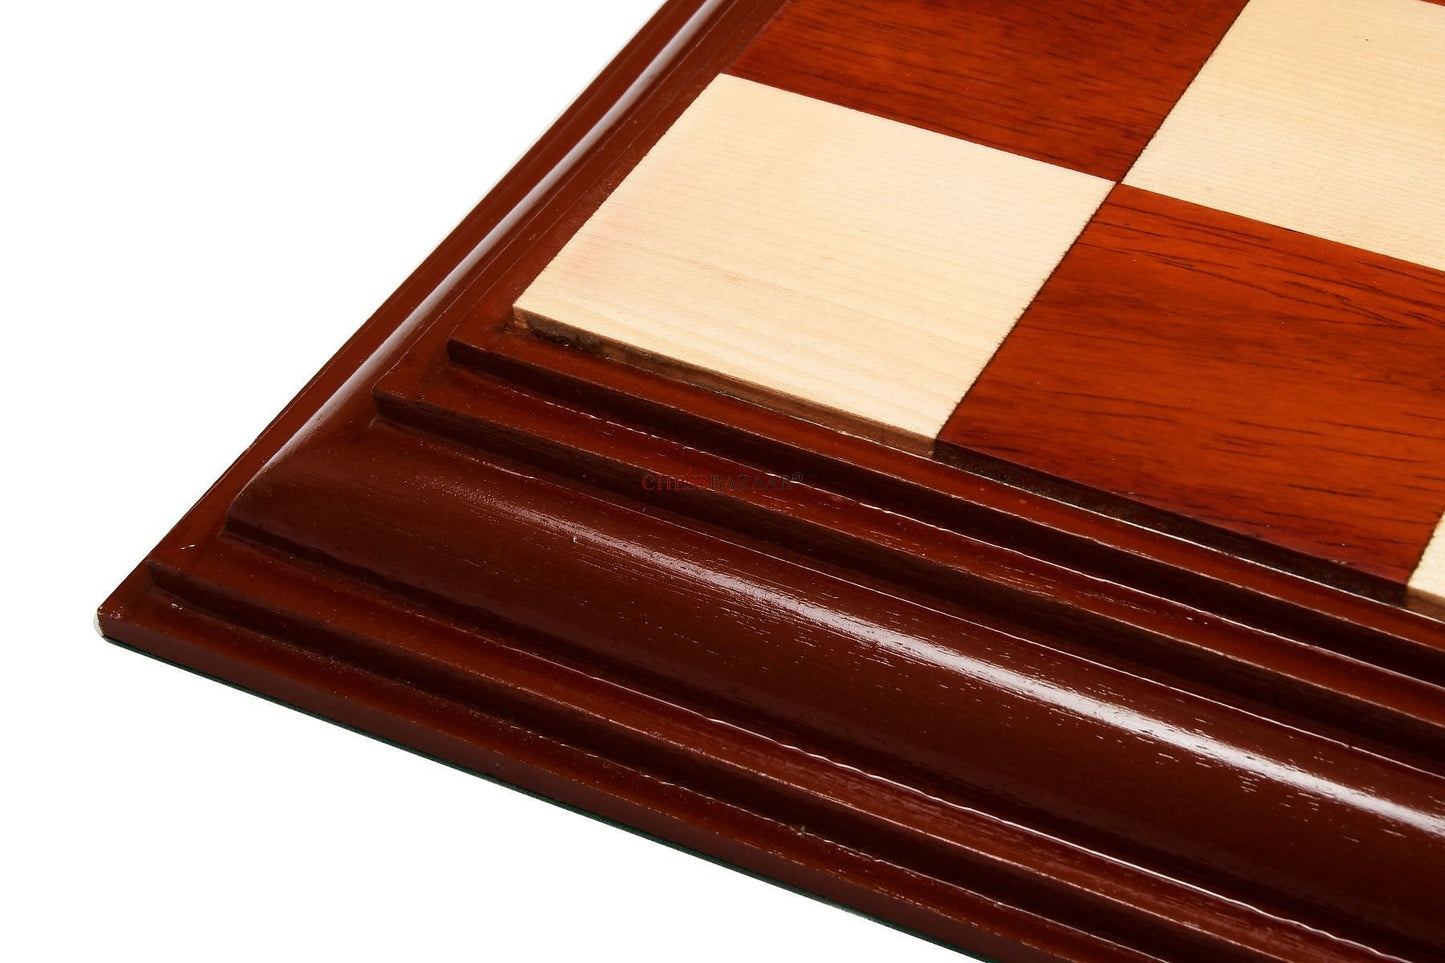 Solid Wooden Luxury Indian Handmade Chess Board in Bud Rosewood (Padauk) & Maple - 21" Board - 55 mm square